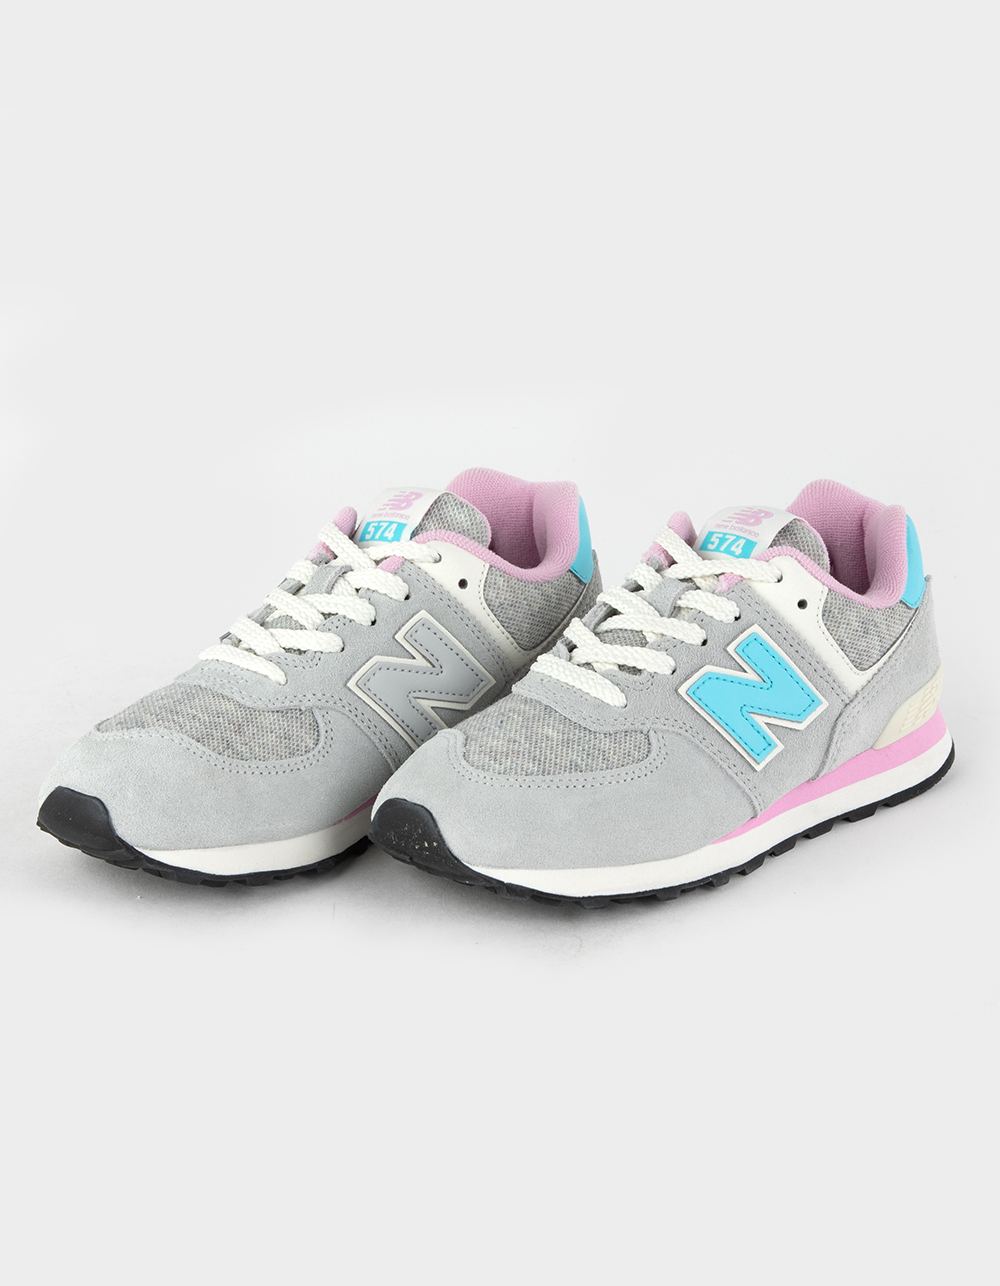 NEW BALANCE Shoes - GRAY | Tillys